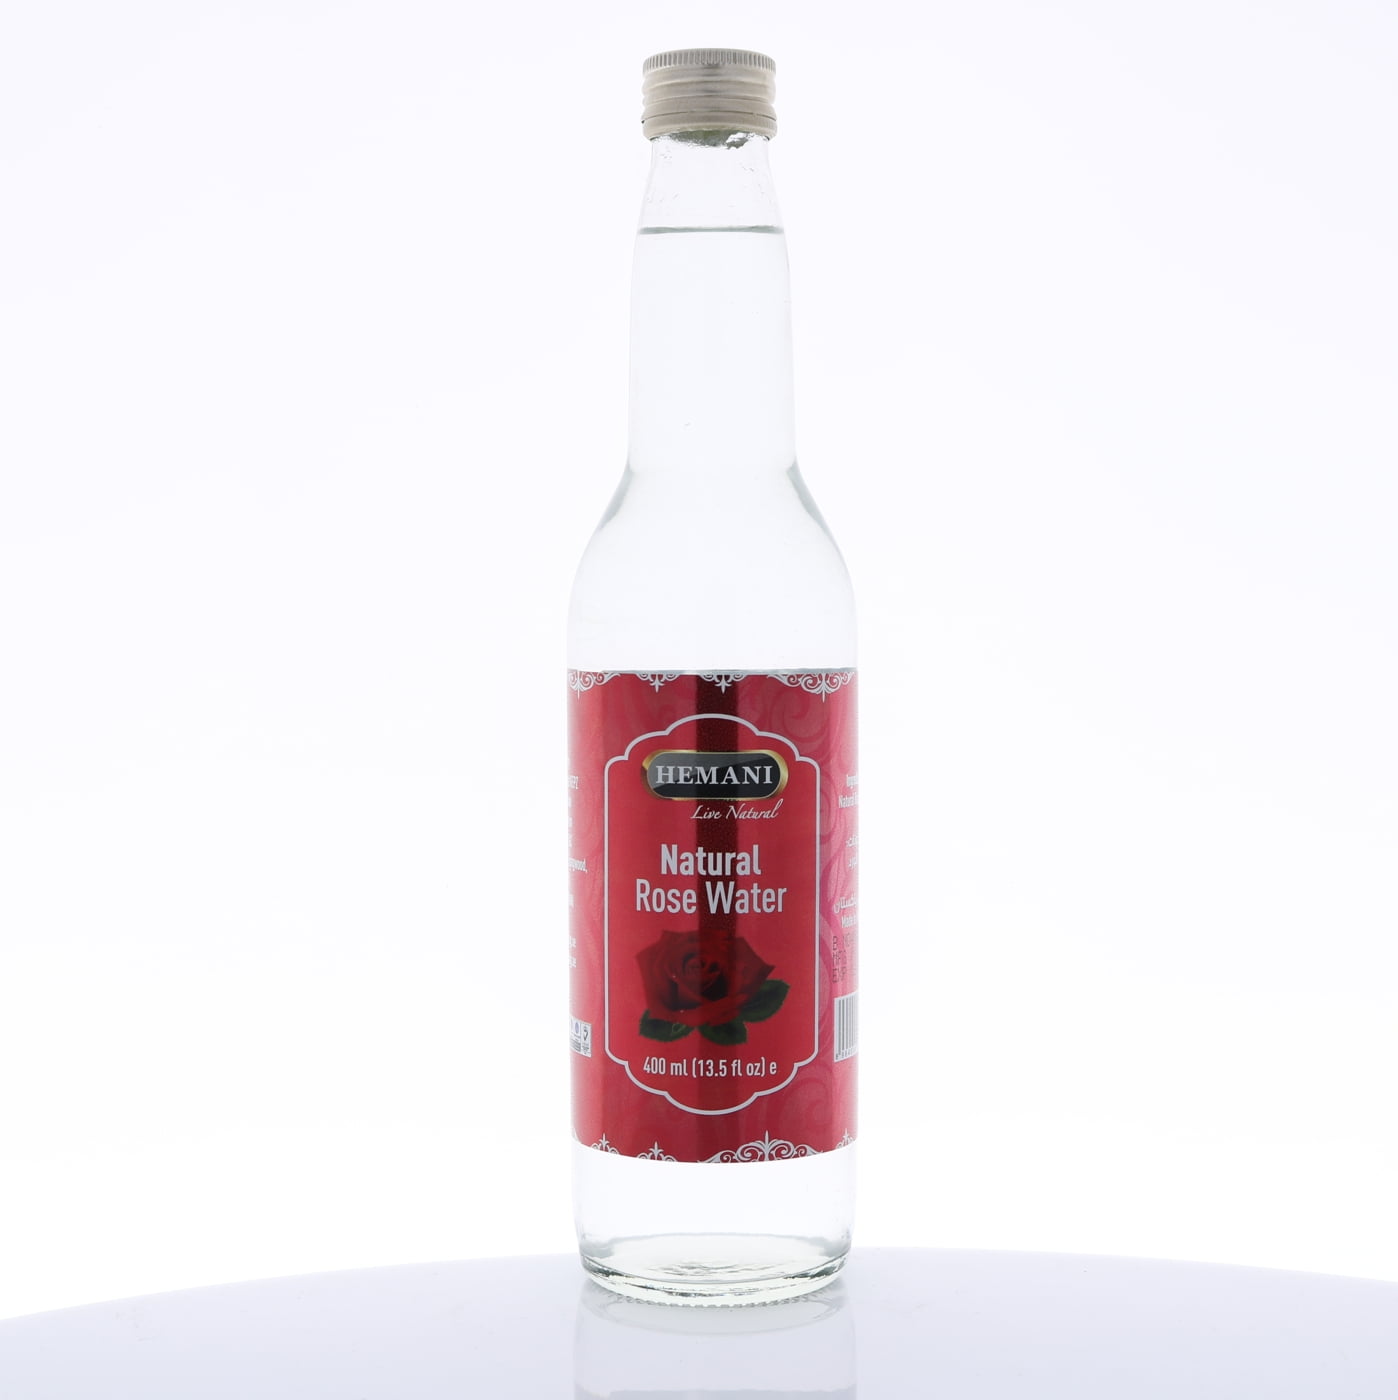 HEMANI Rose Water 400mL (13.5 FL OZ) - Food Essence for Cooking and Baking